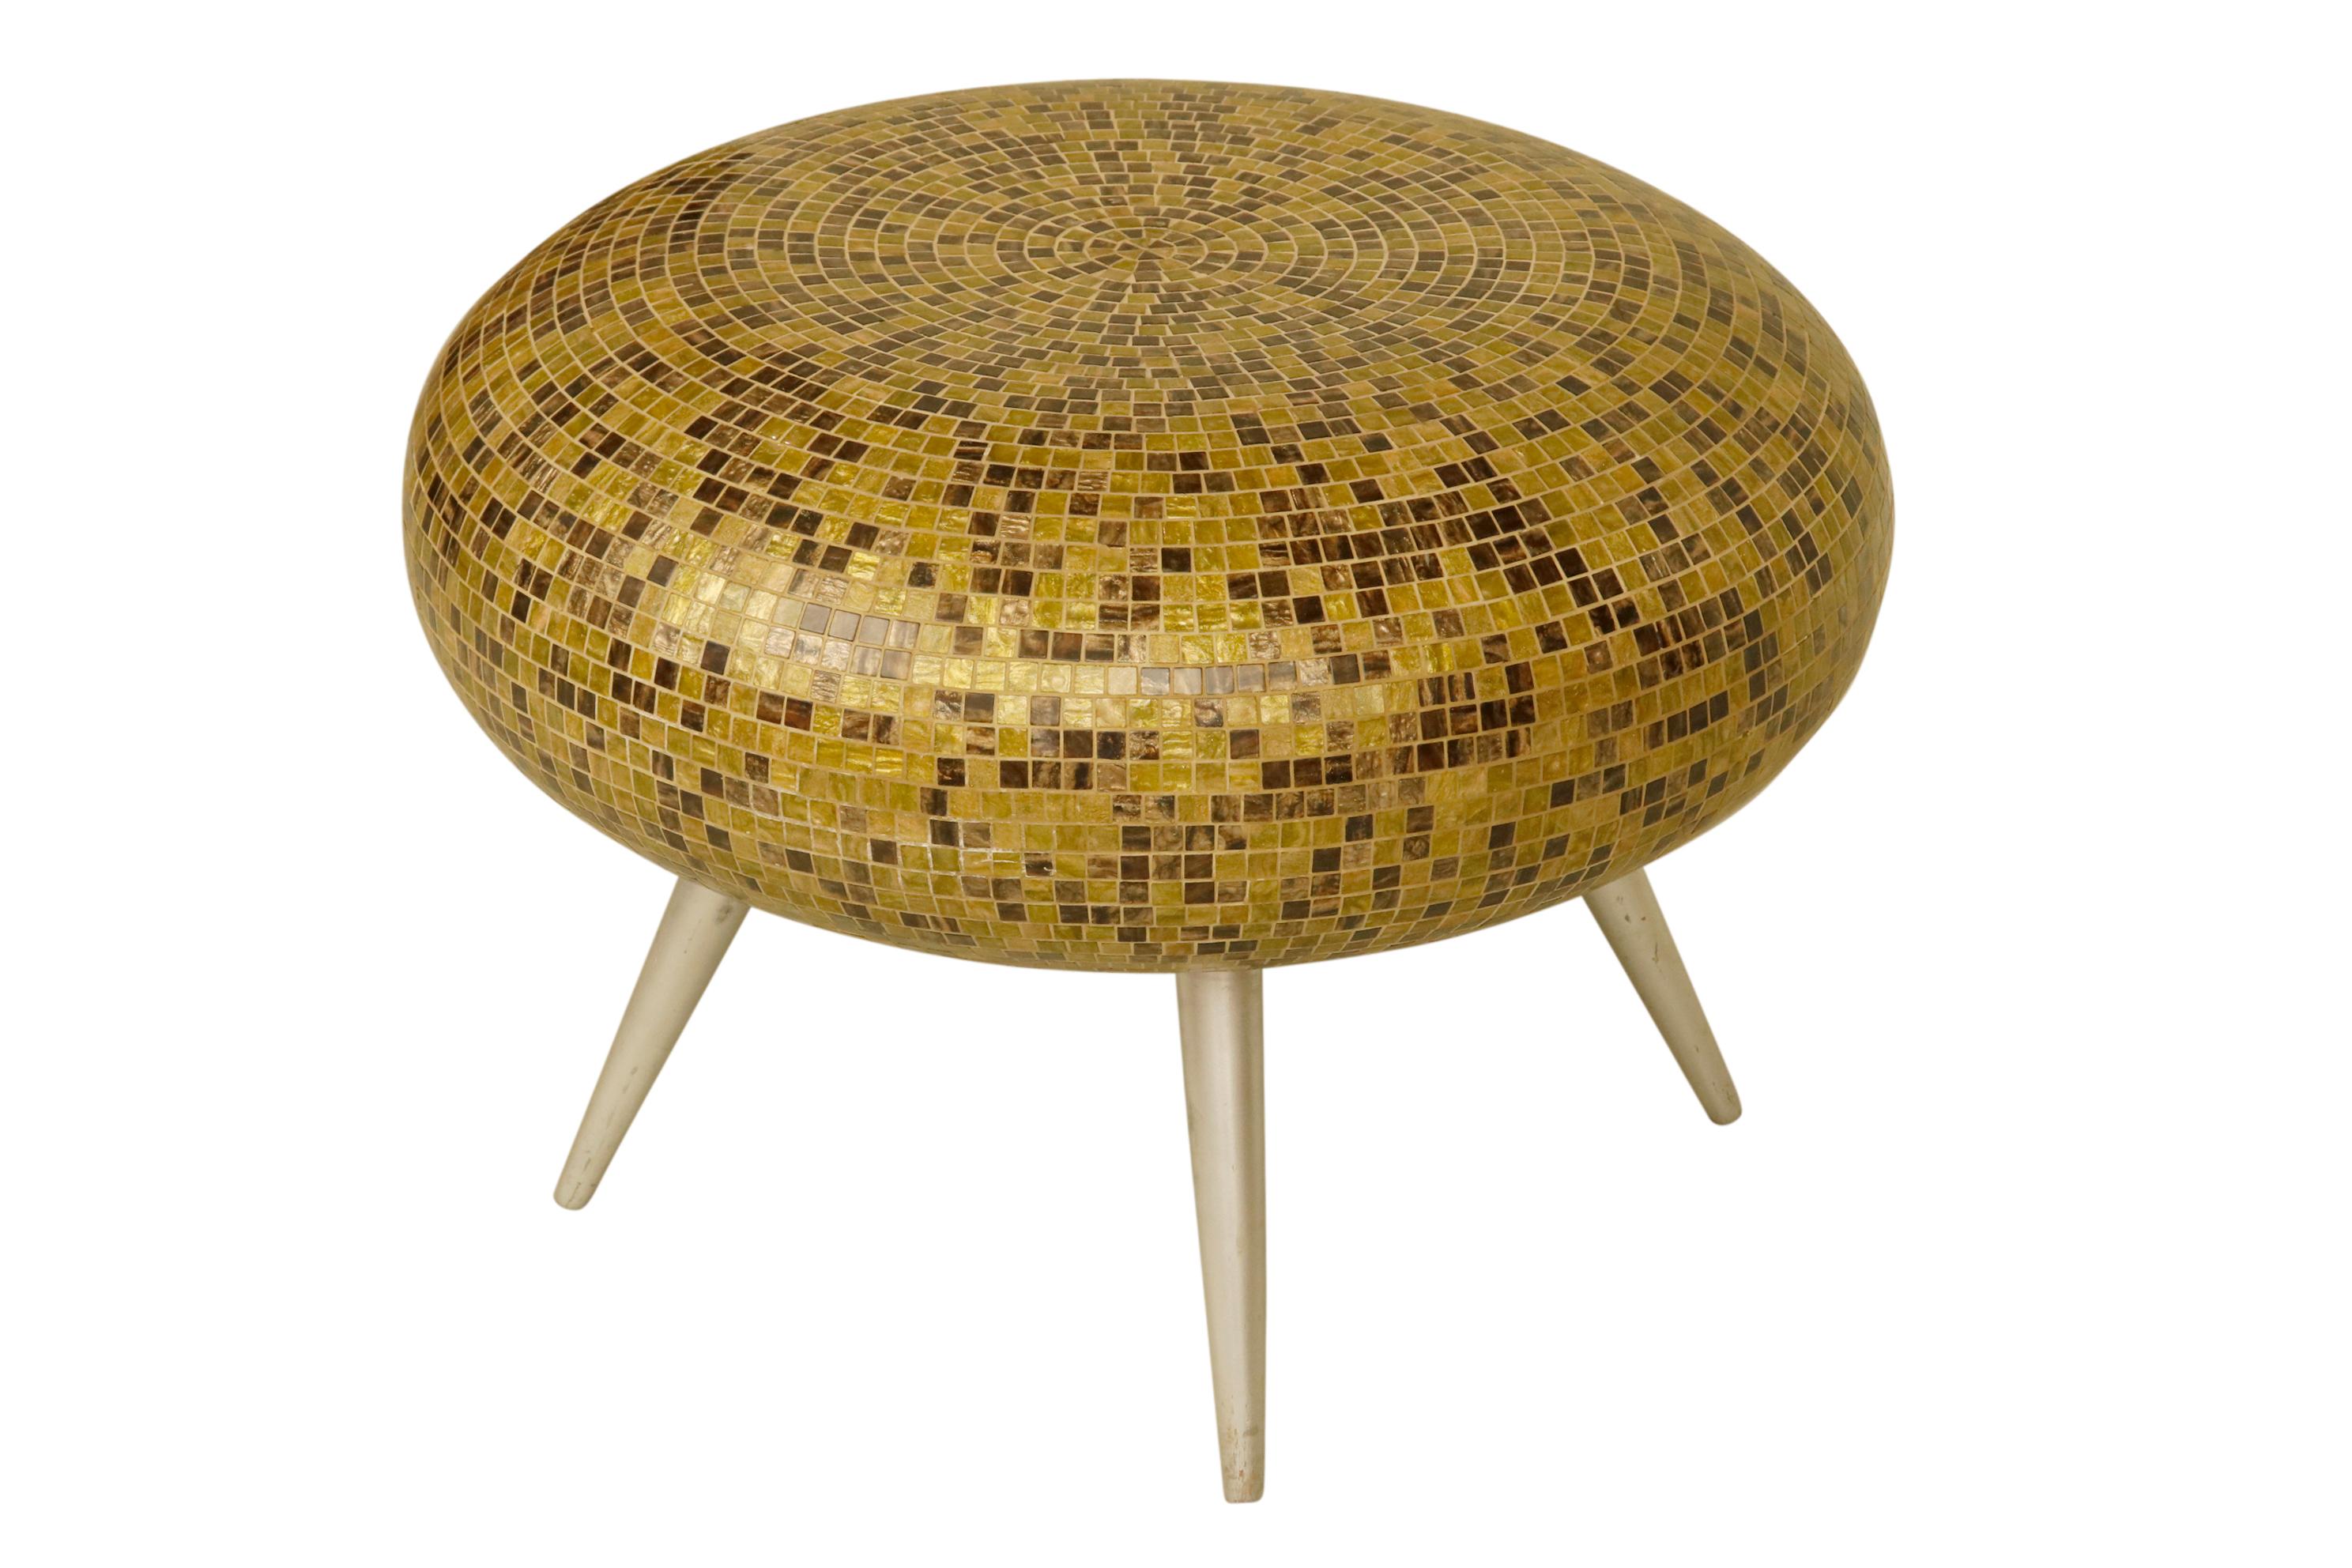 This unique pouf or stool or end table was produced by CRAFTOR.